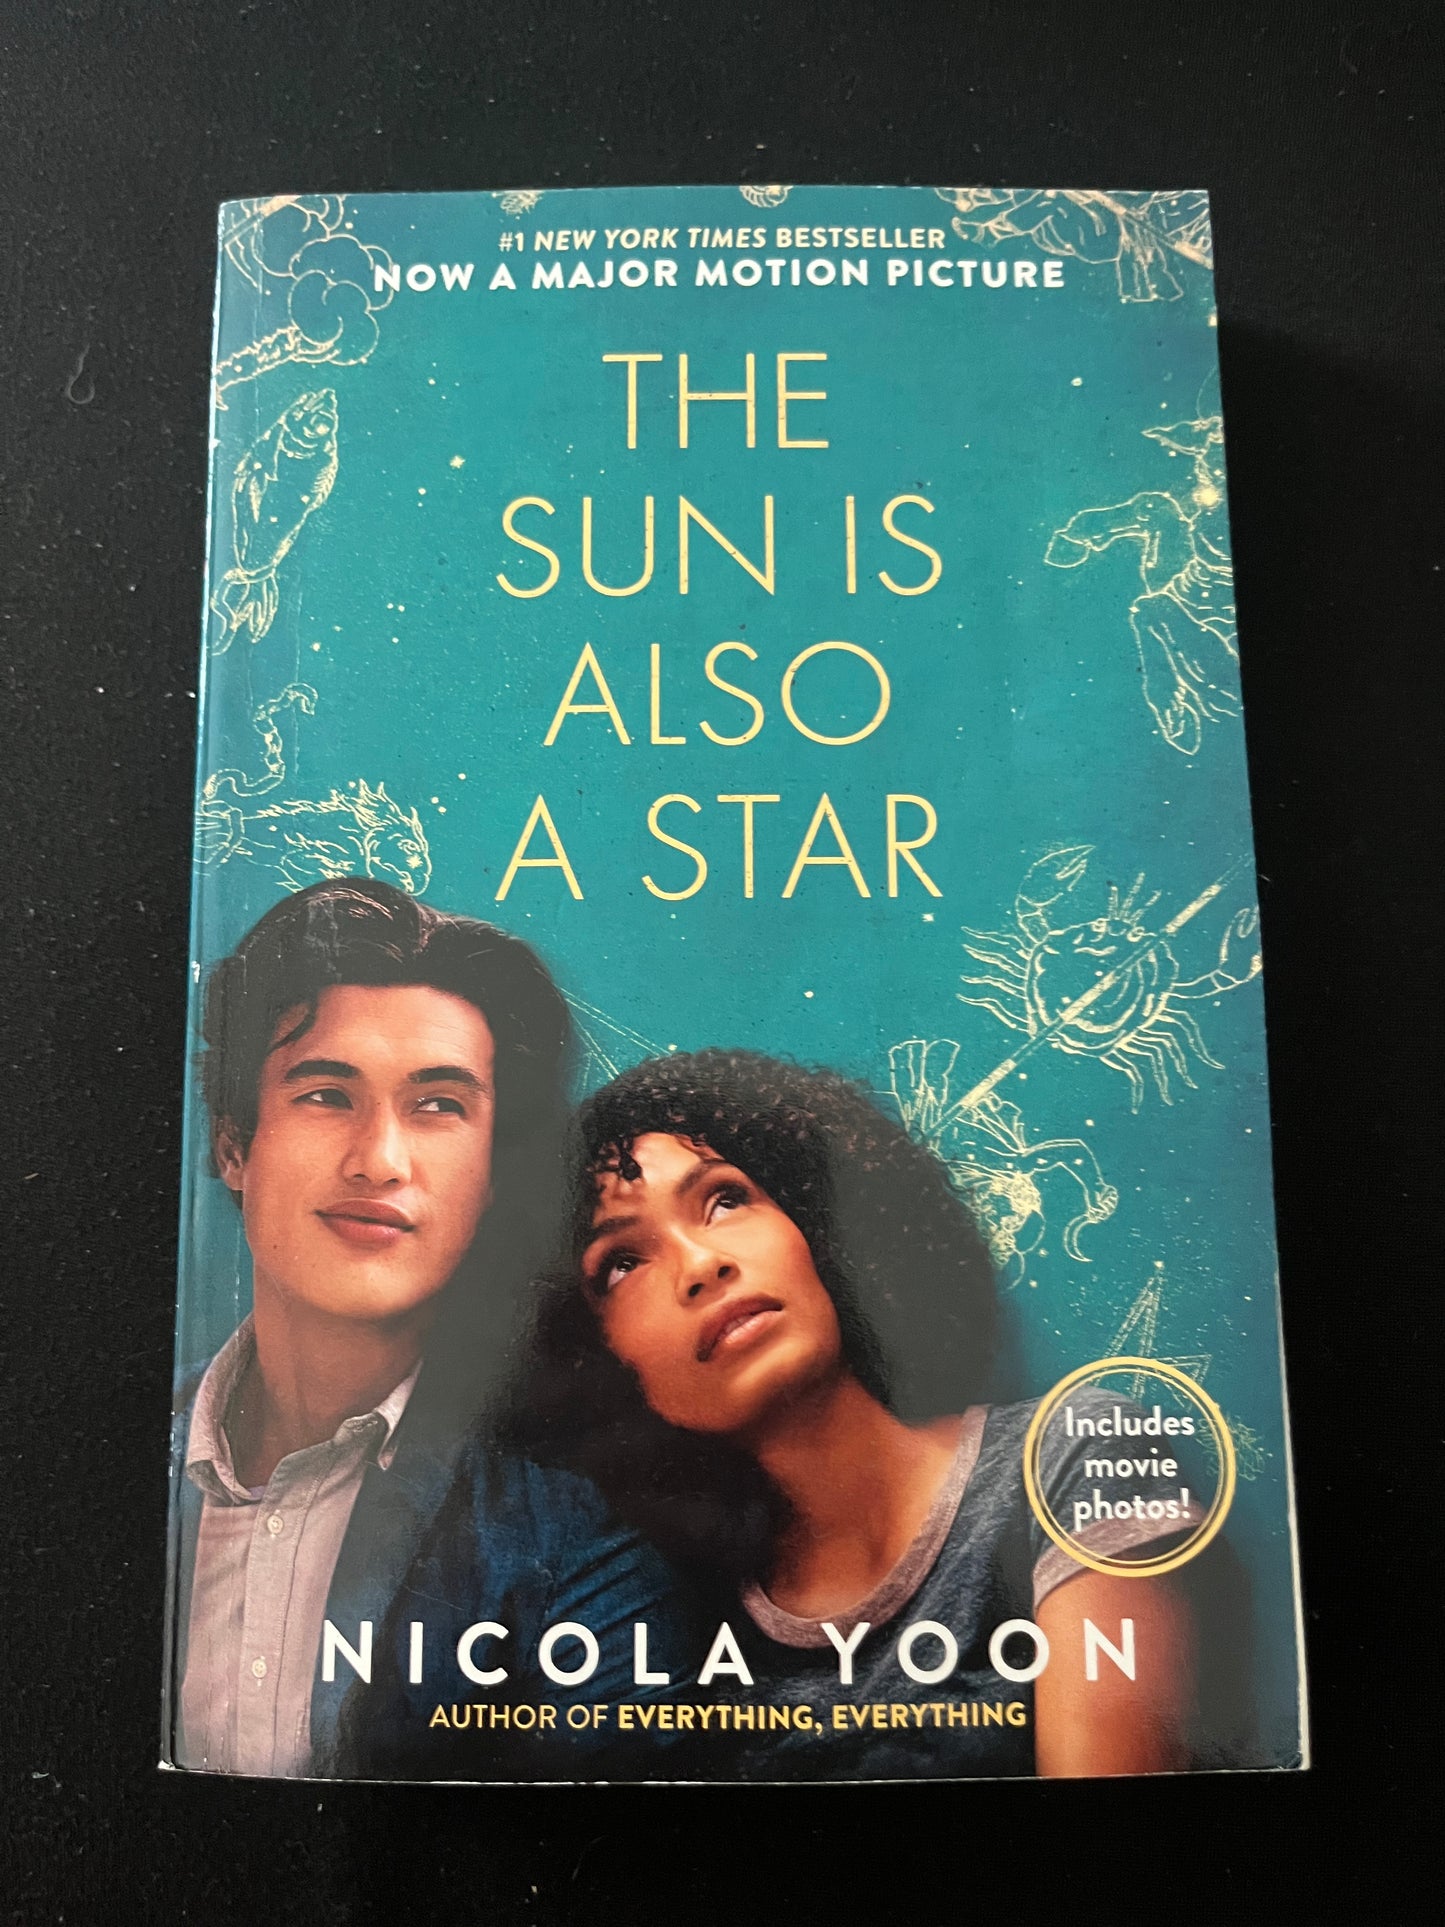 THE SUN IS ALSO A STAR by Nicola Yoon